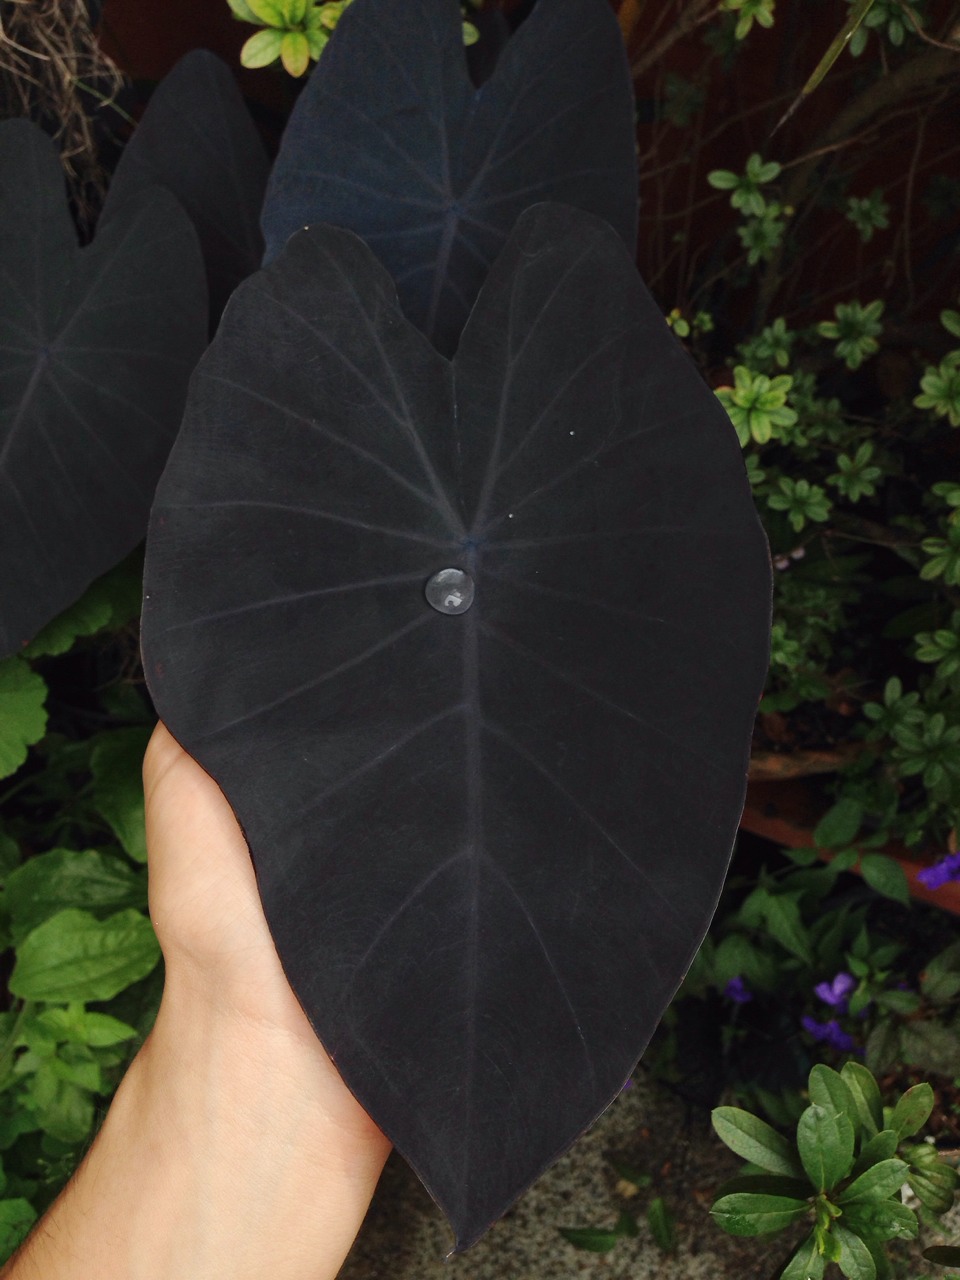 Black leaf with one sole drop of water on it.